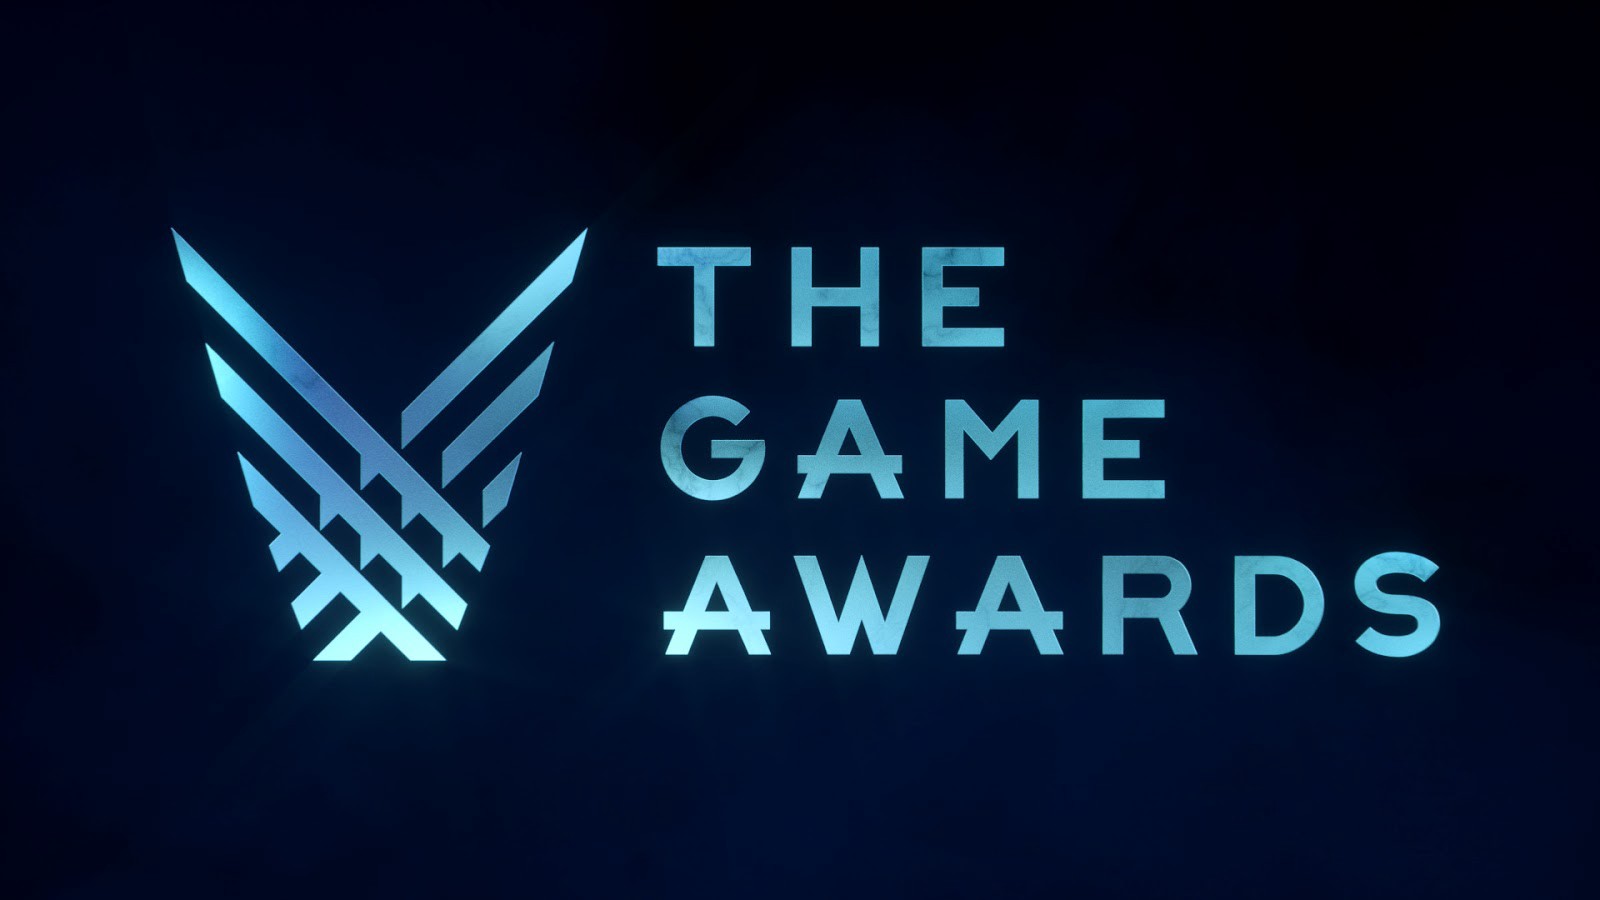 Best Performance - Game Awards 2018 